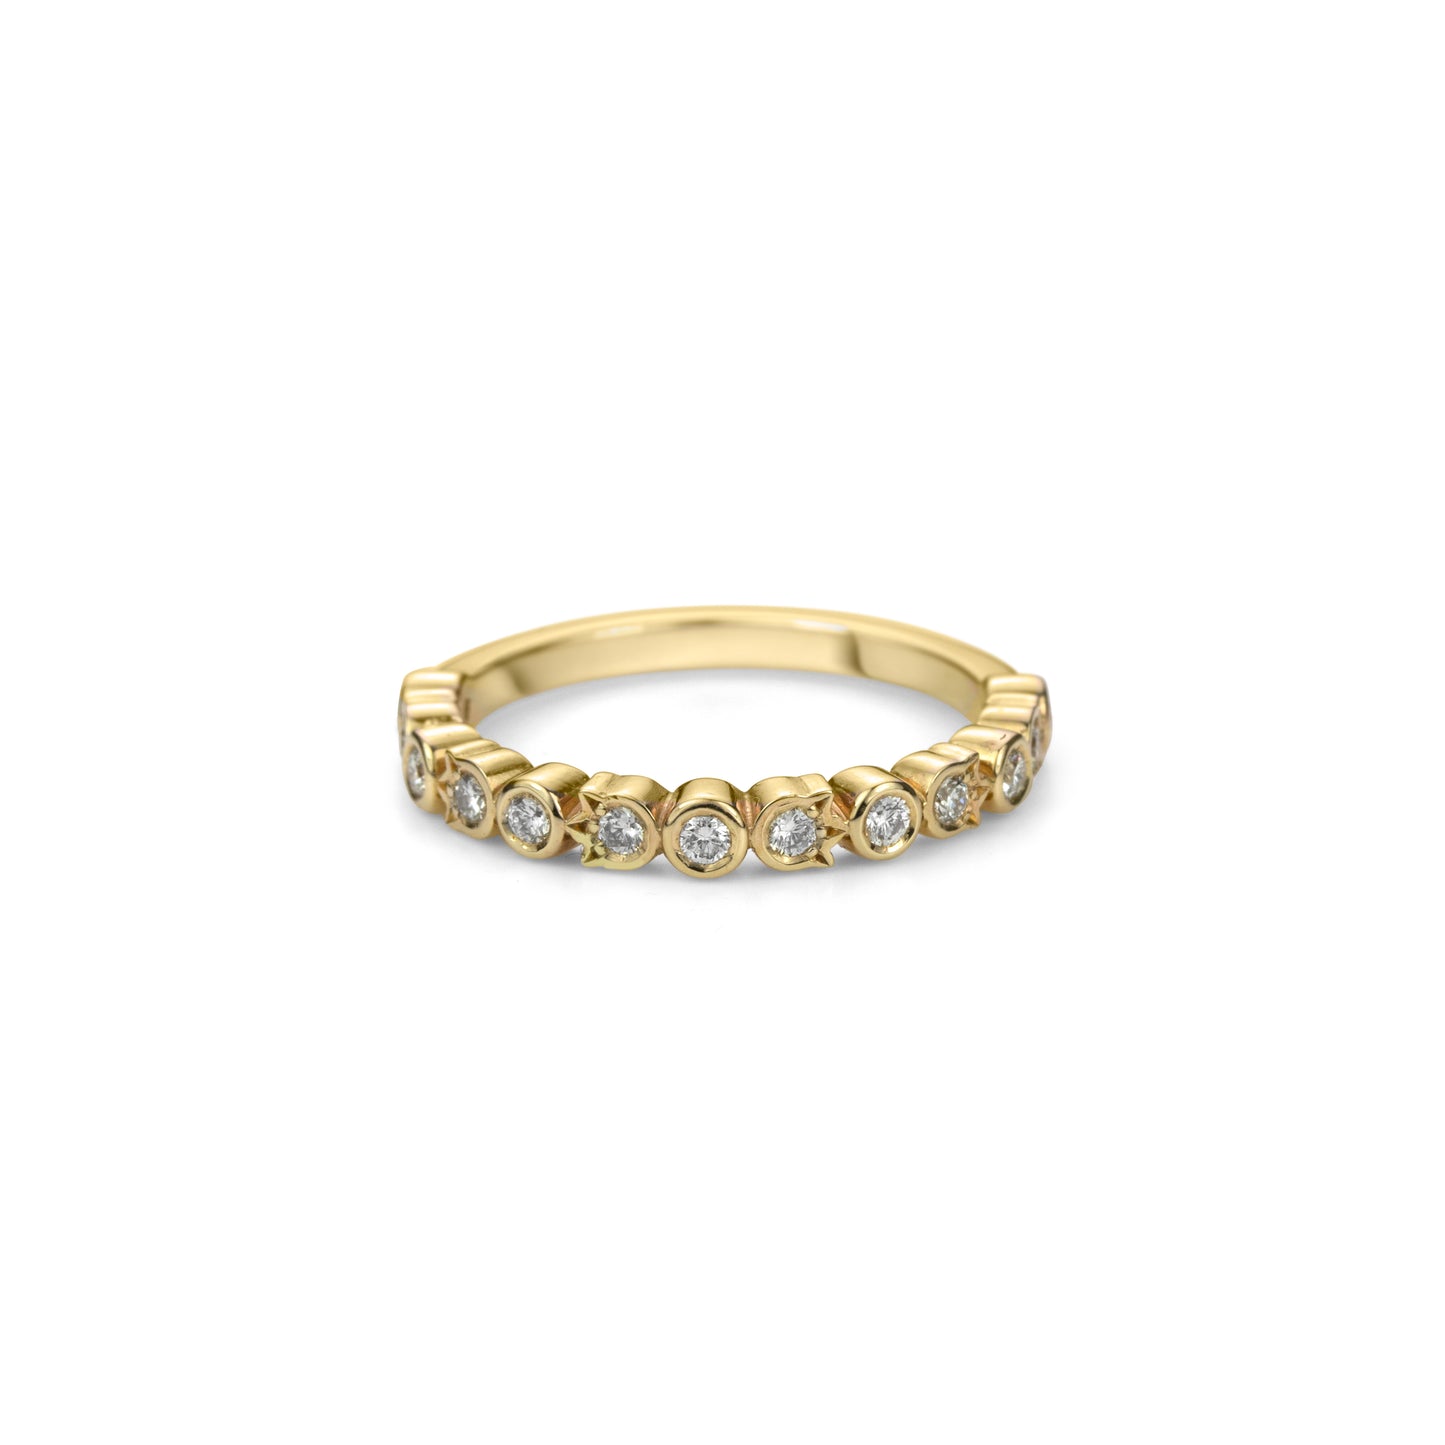 A yellow gold and diamond half eternity band ring set with diamonds in alternating round and flower shaped bezels.